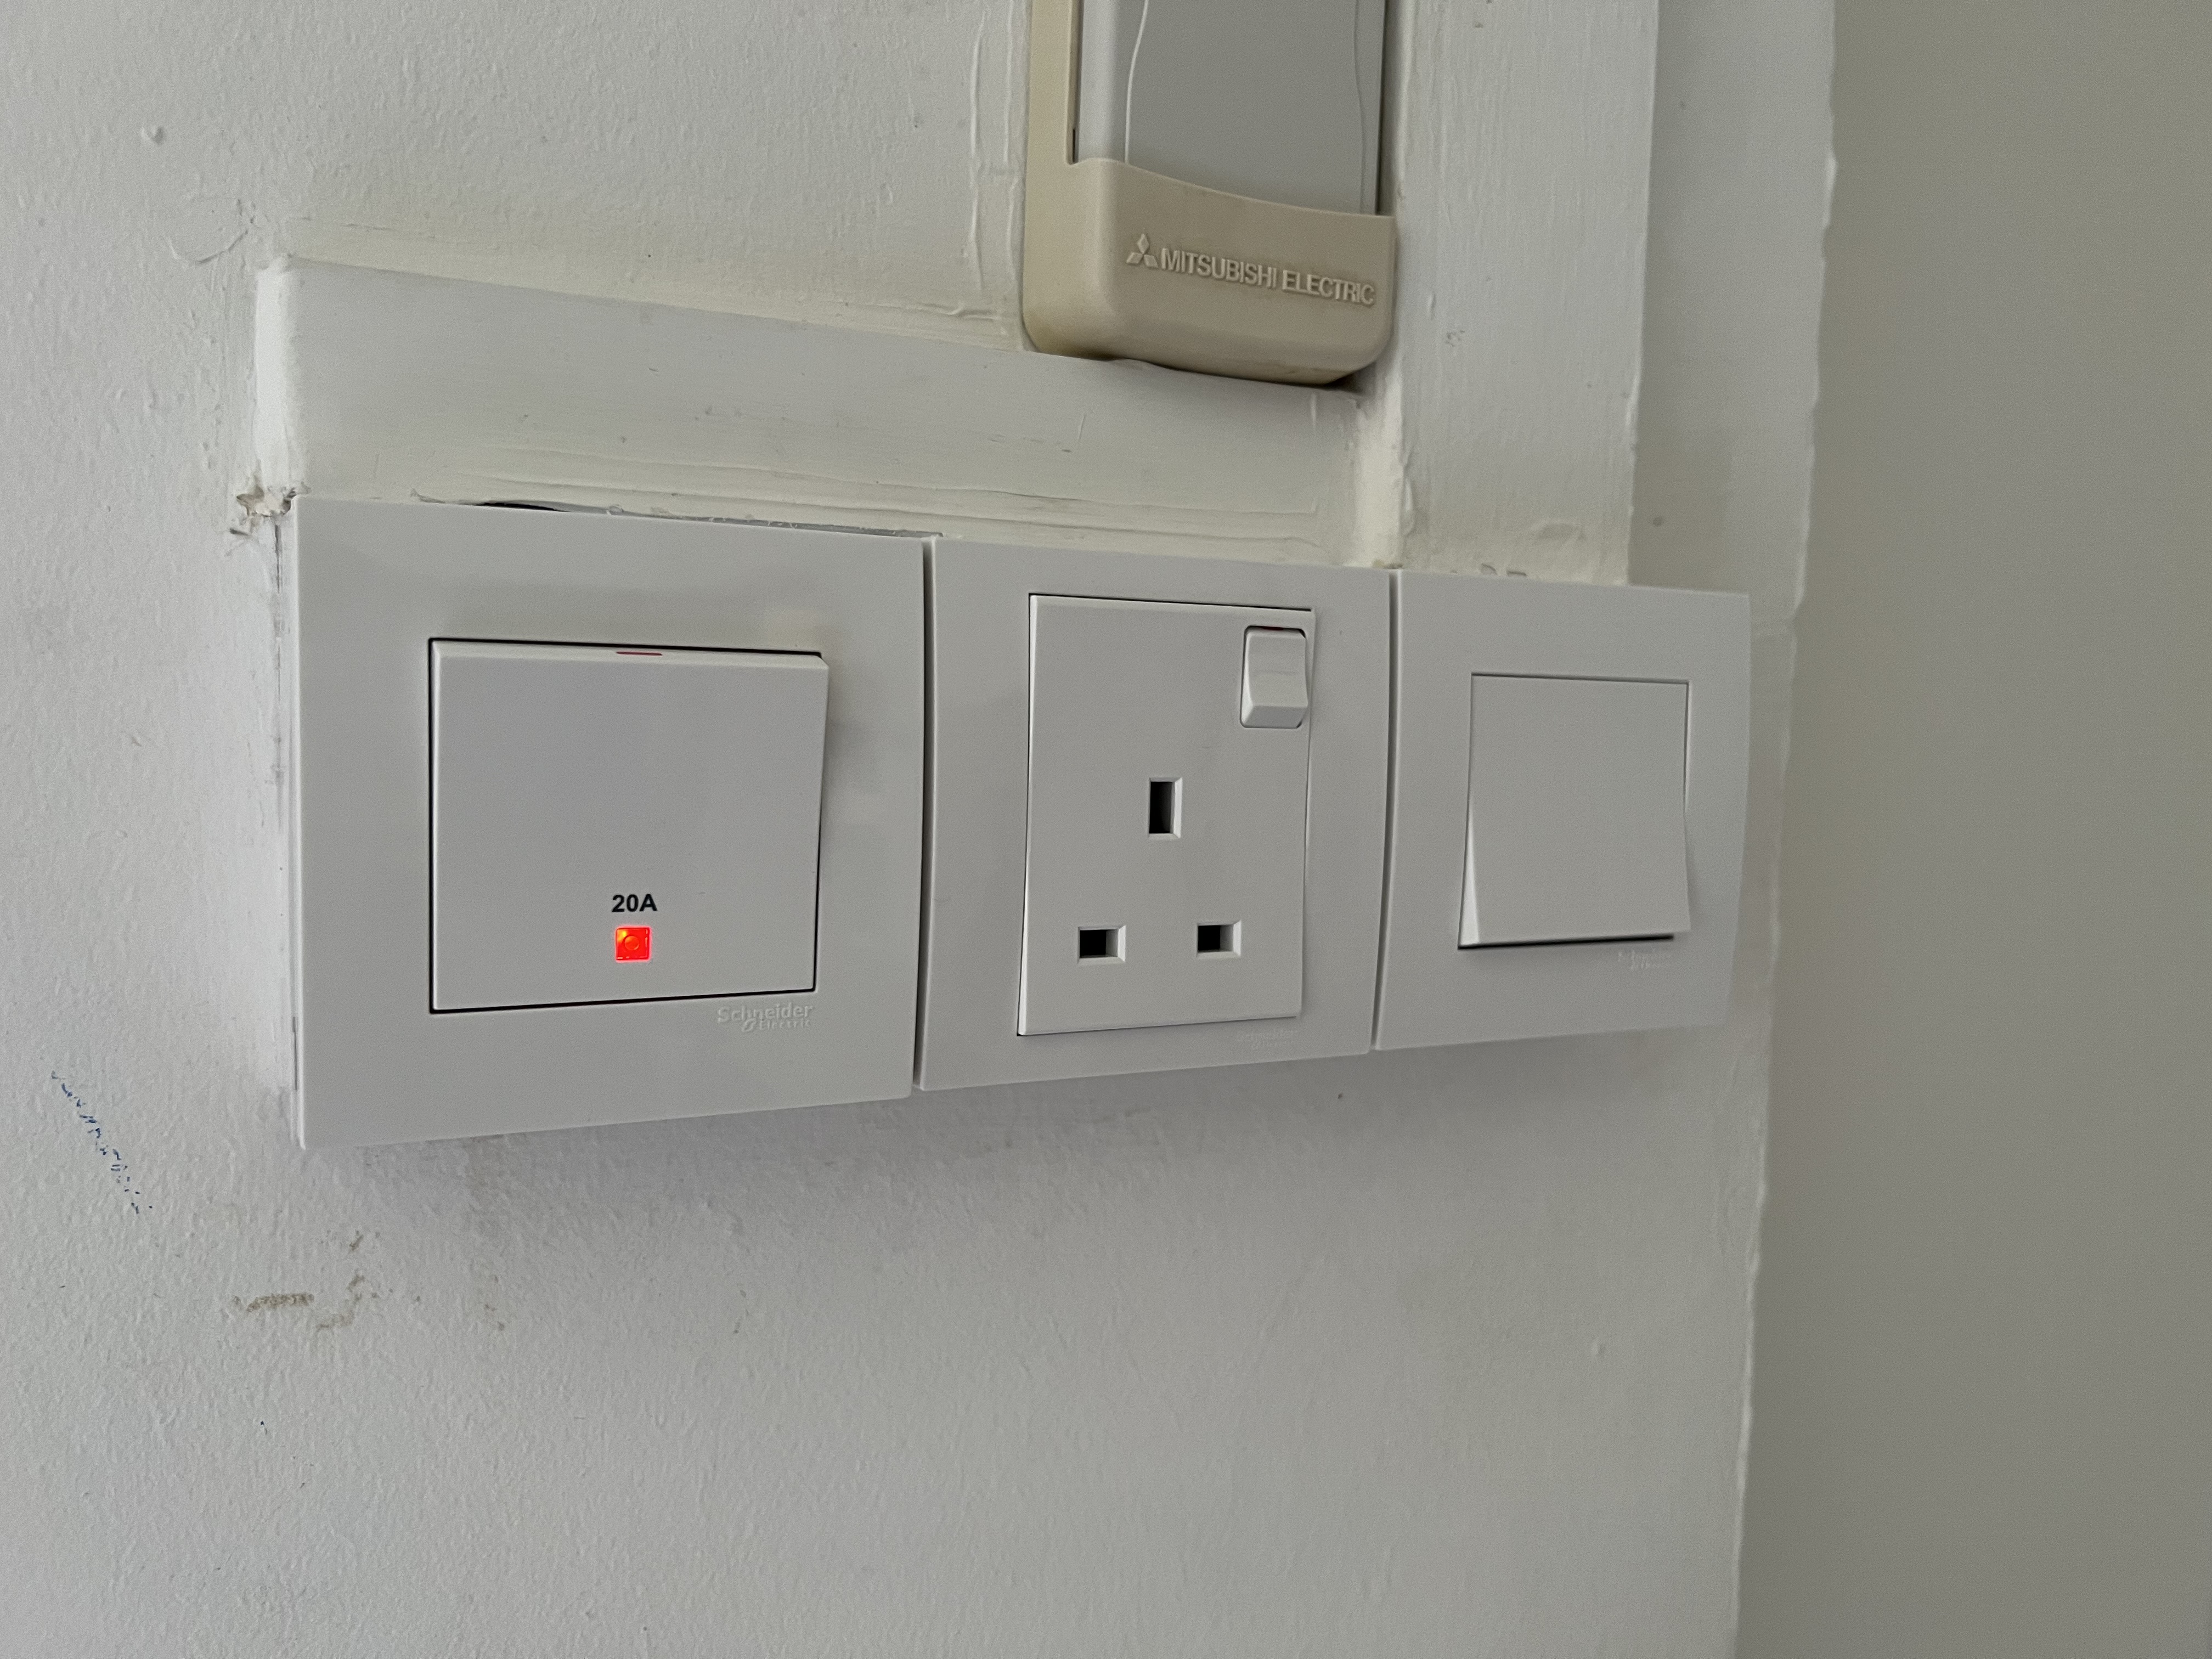 A water heater switch, single socket, and one-gang switch we installed